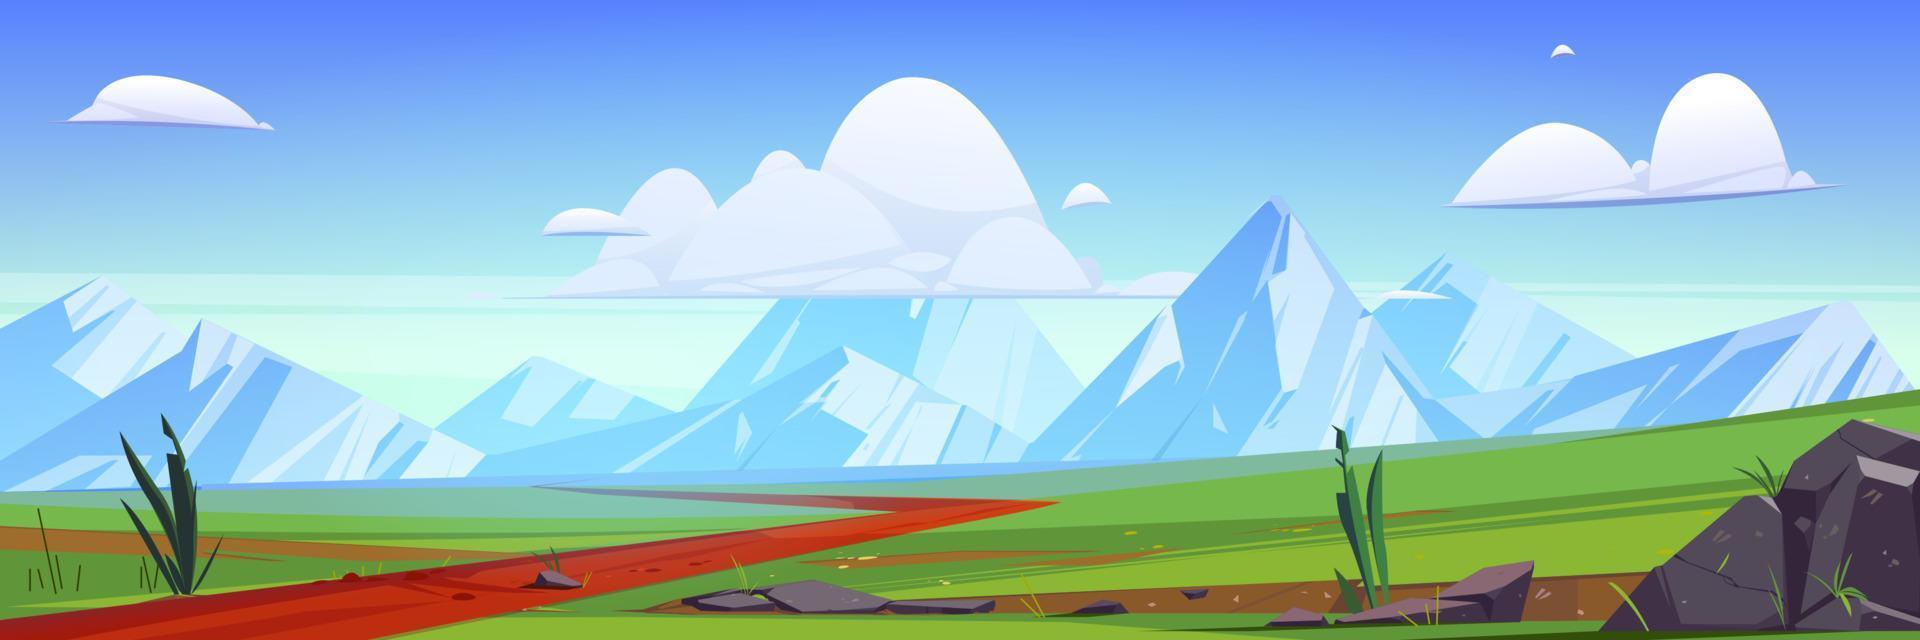 Cartoon nature mountain landscape with rural road vector